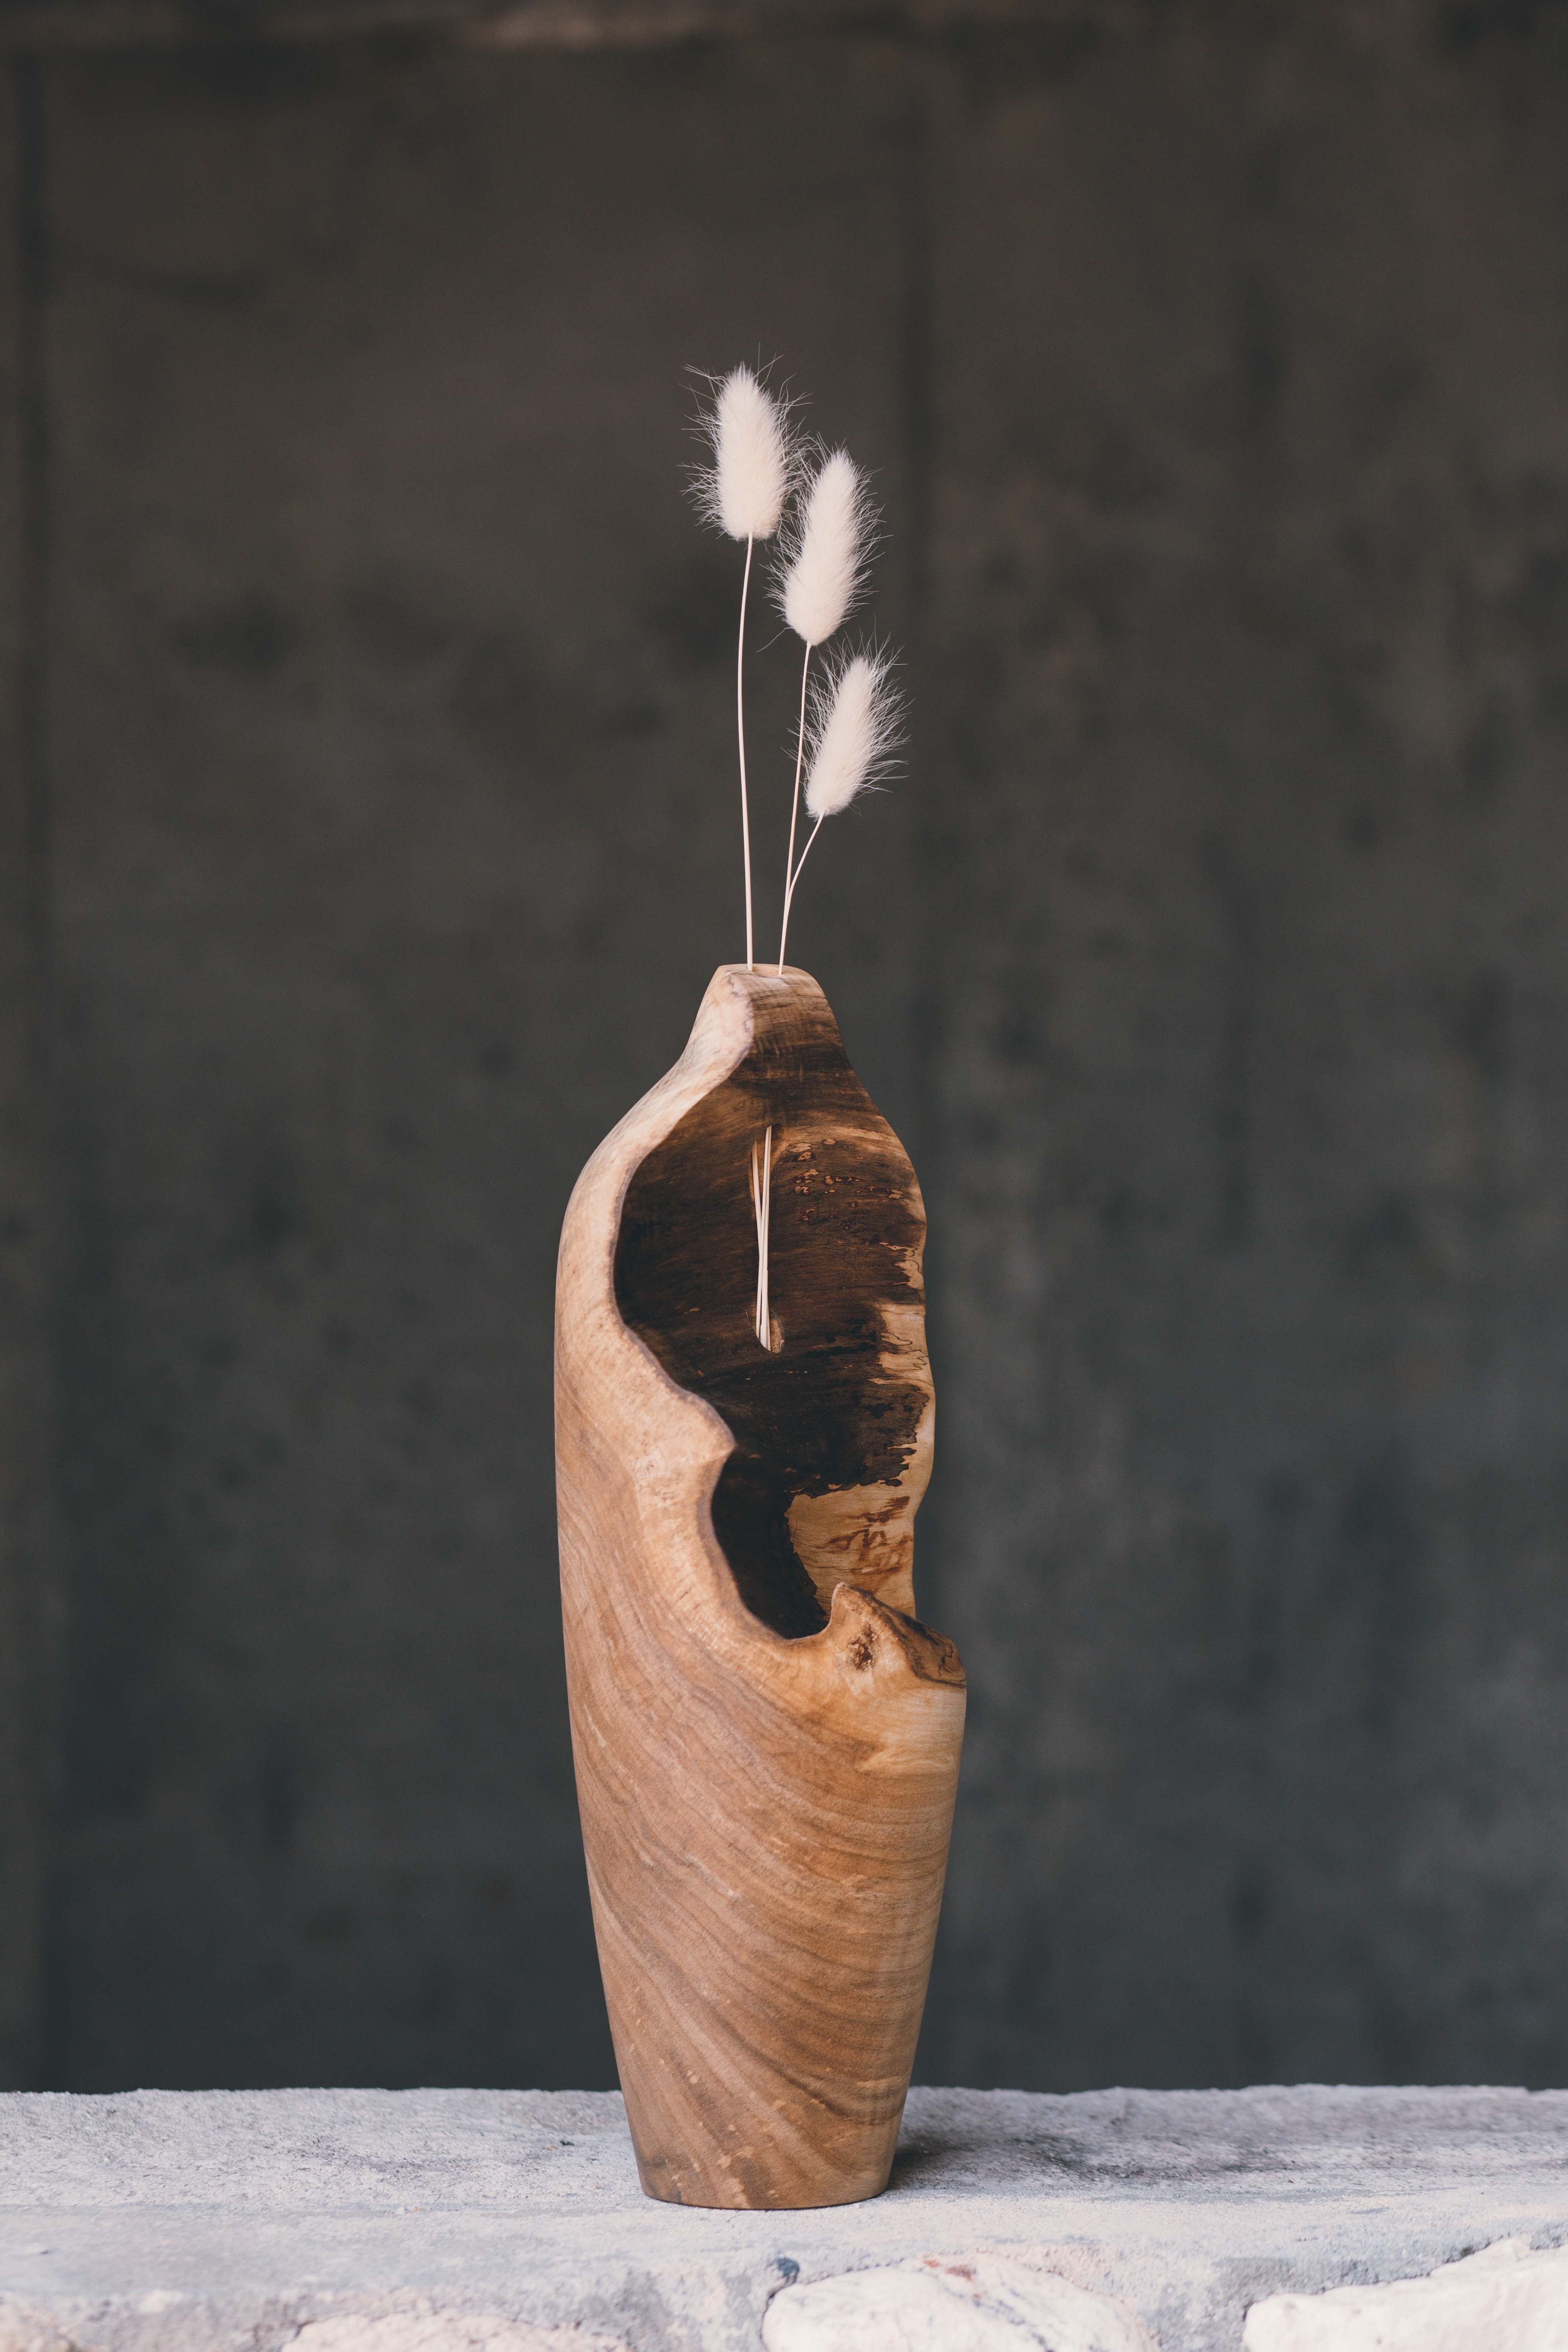 wooden tall classic shaped budvase with a cavernous bark inclusion and an opening for dried floral stems.